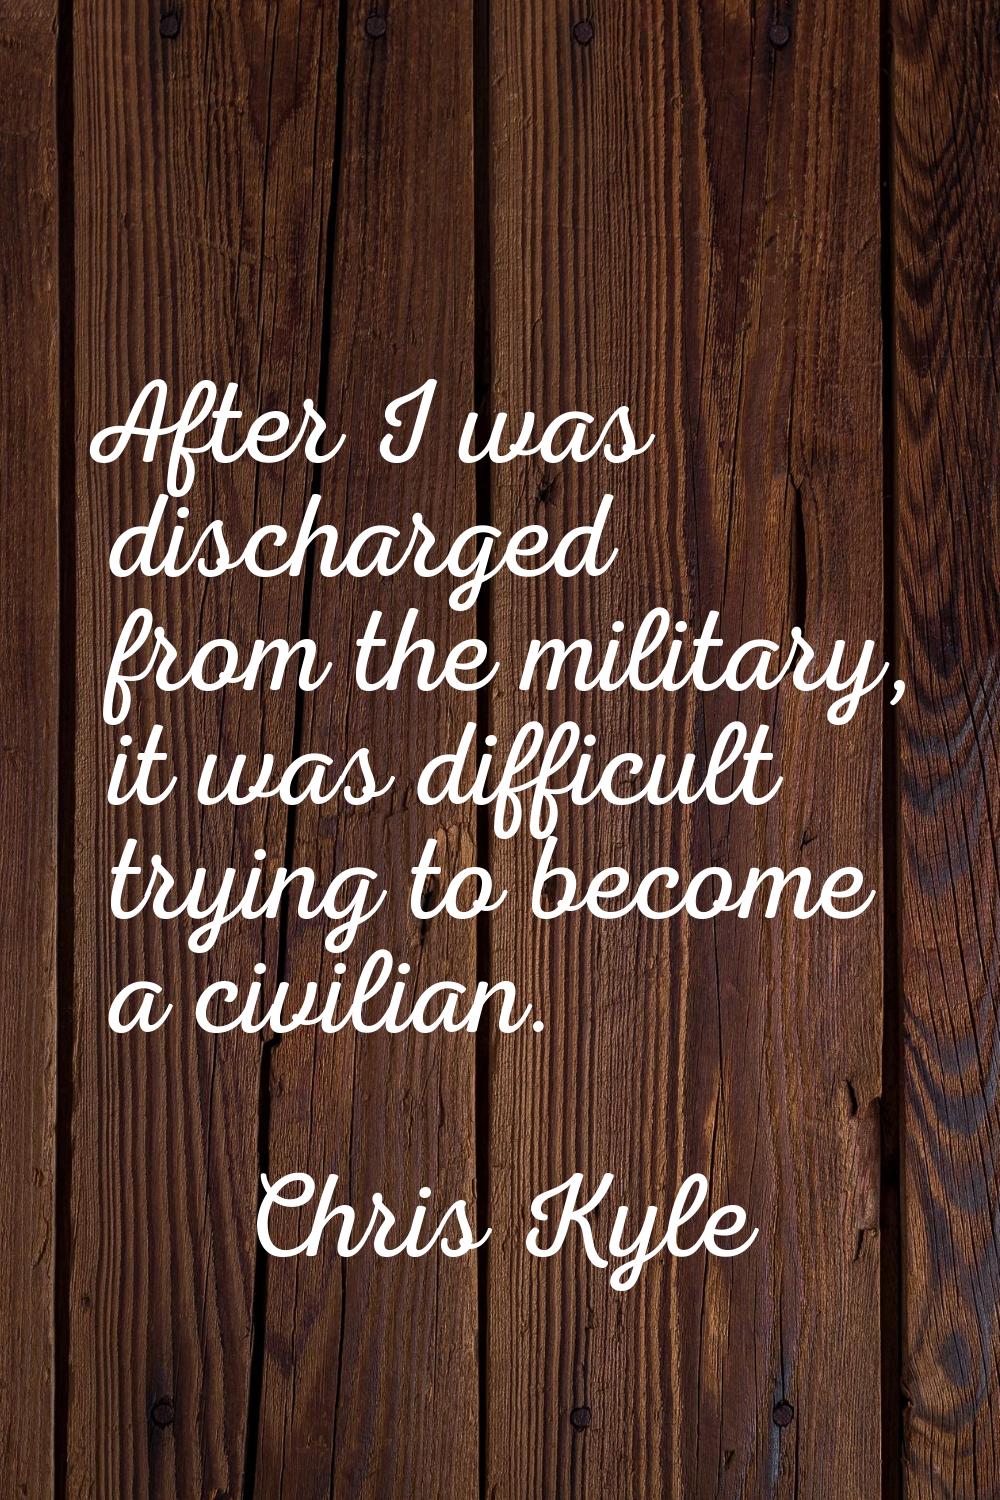 After I was discharged from the military, it was difficult trying to become a civilian.